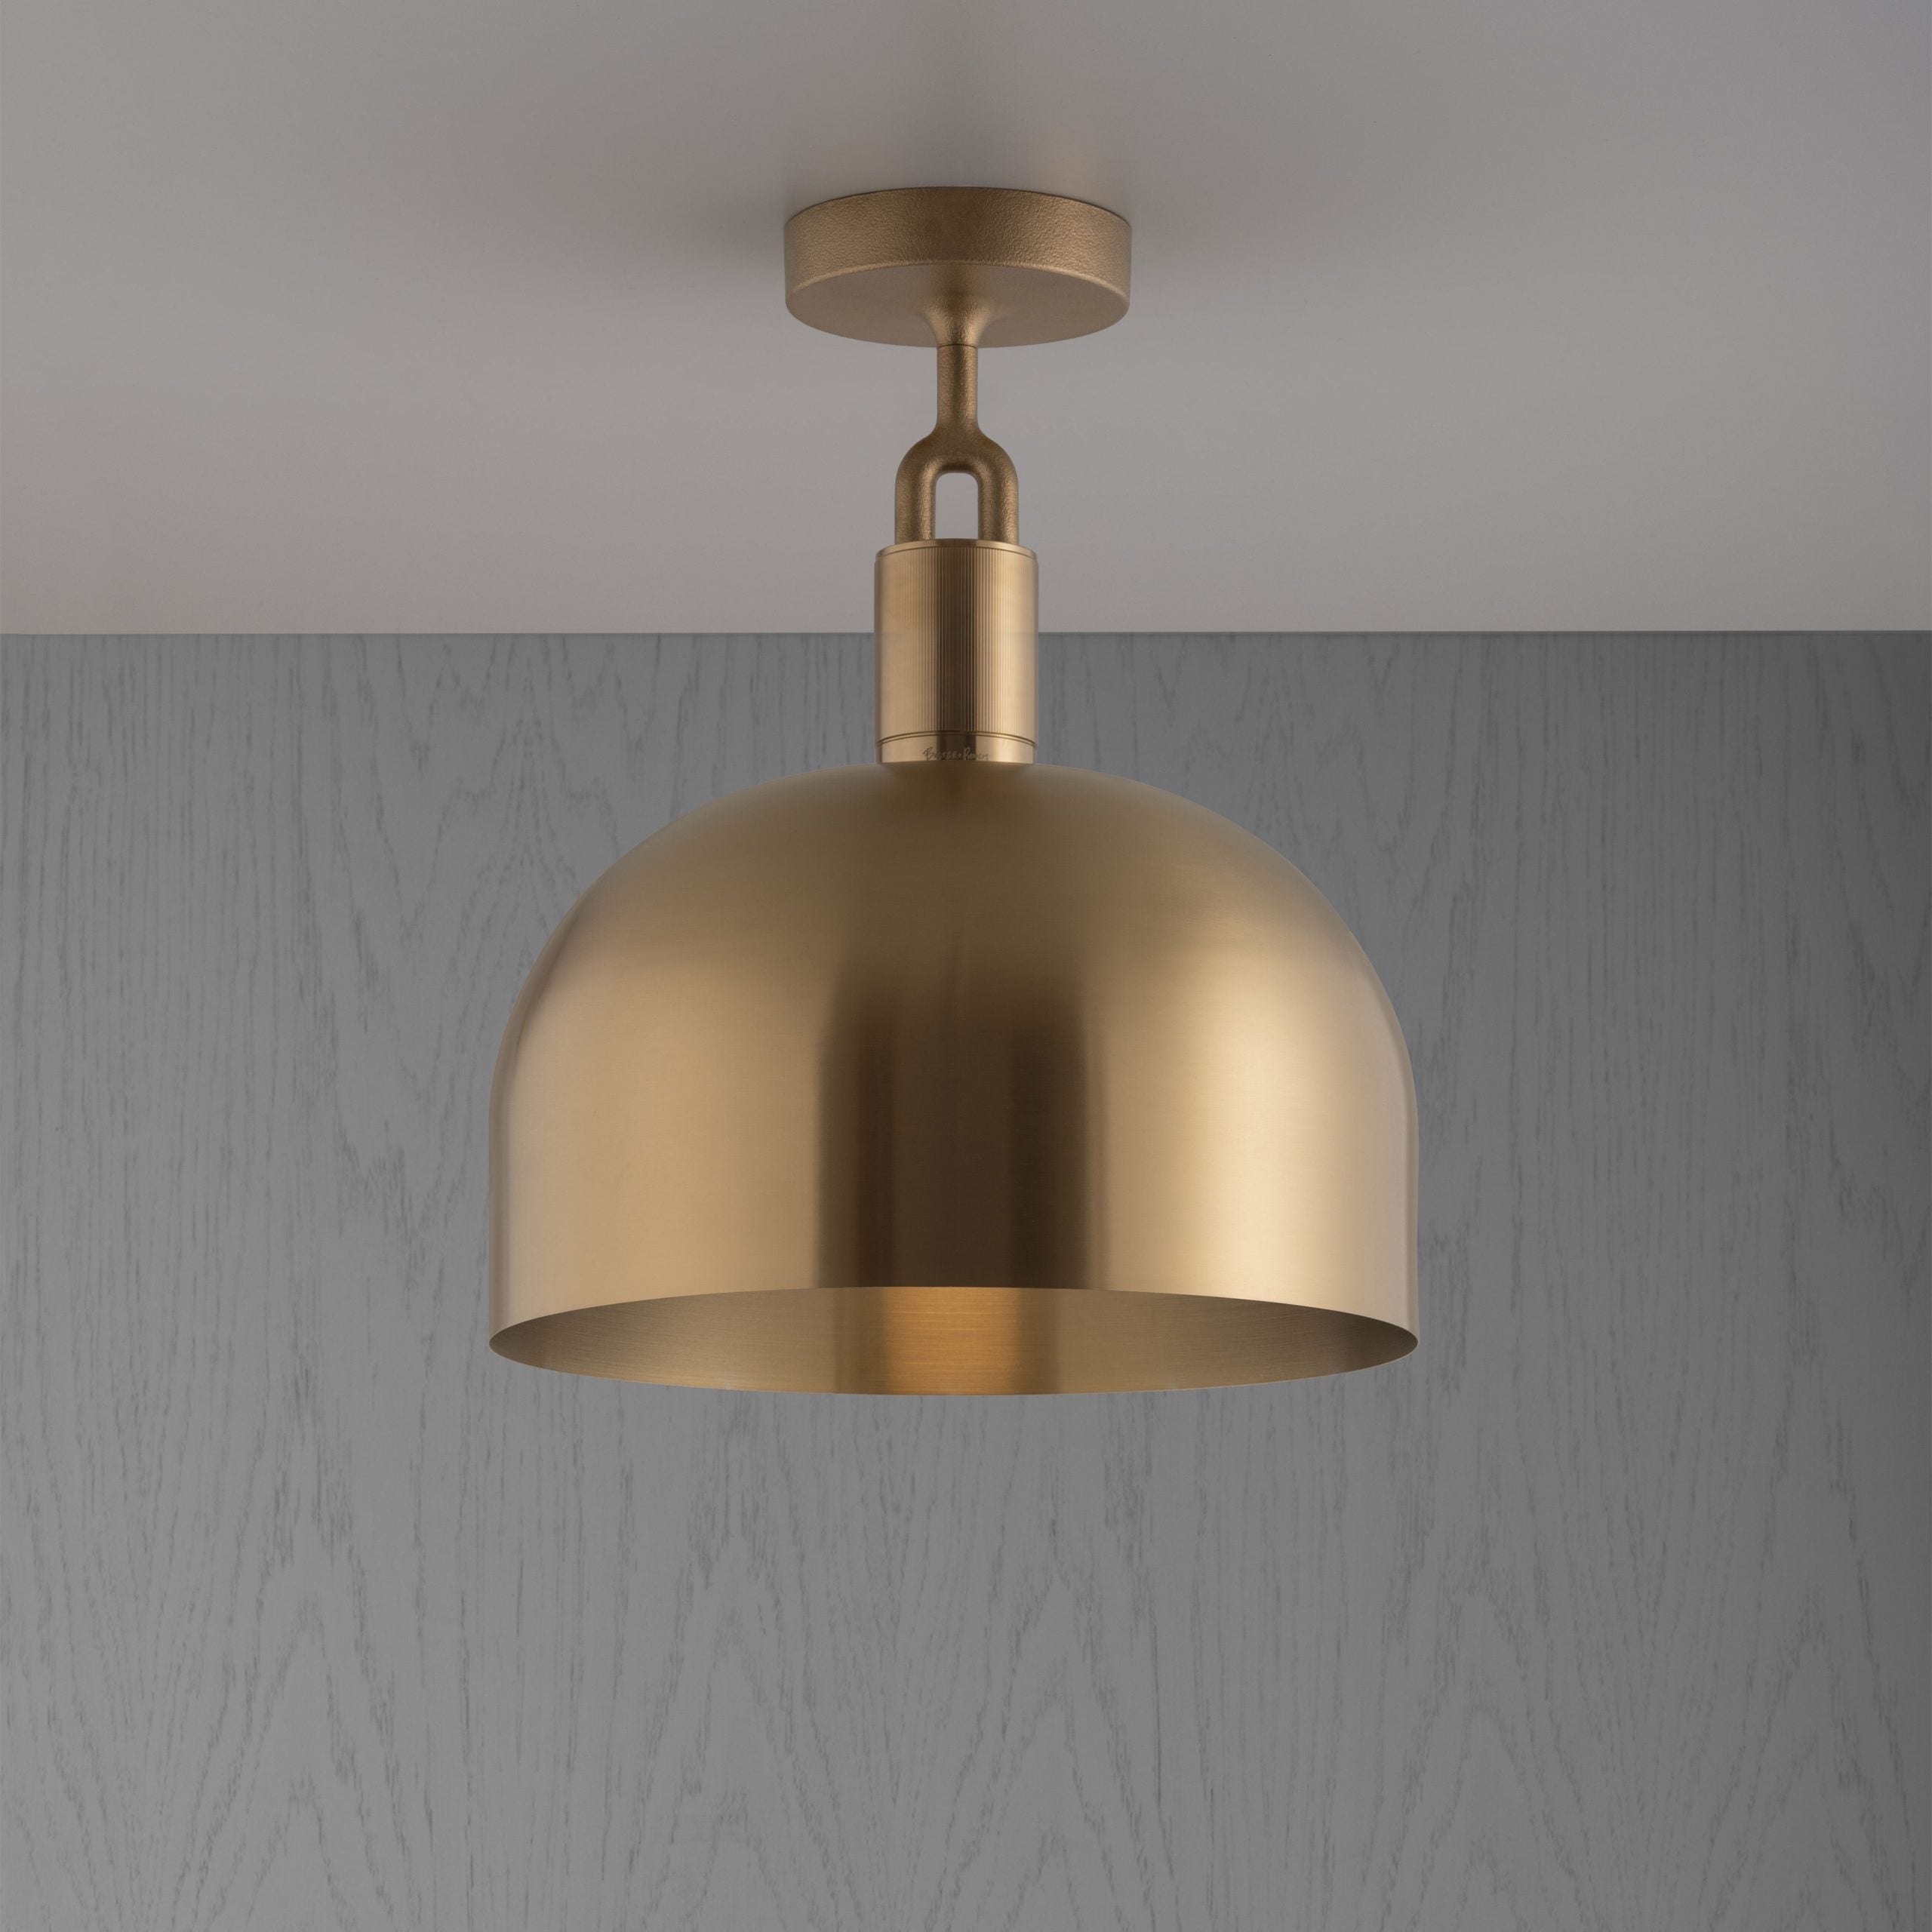 Buster + Punch - NFC-813204 - Forked Ceiling - Shade - Forked - Brass 